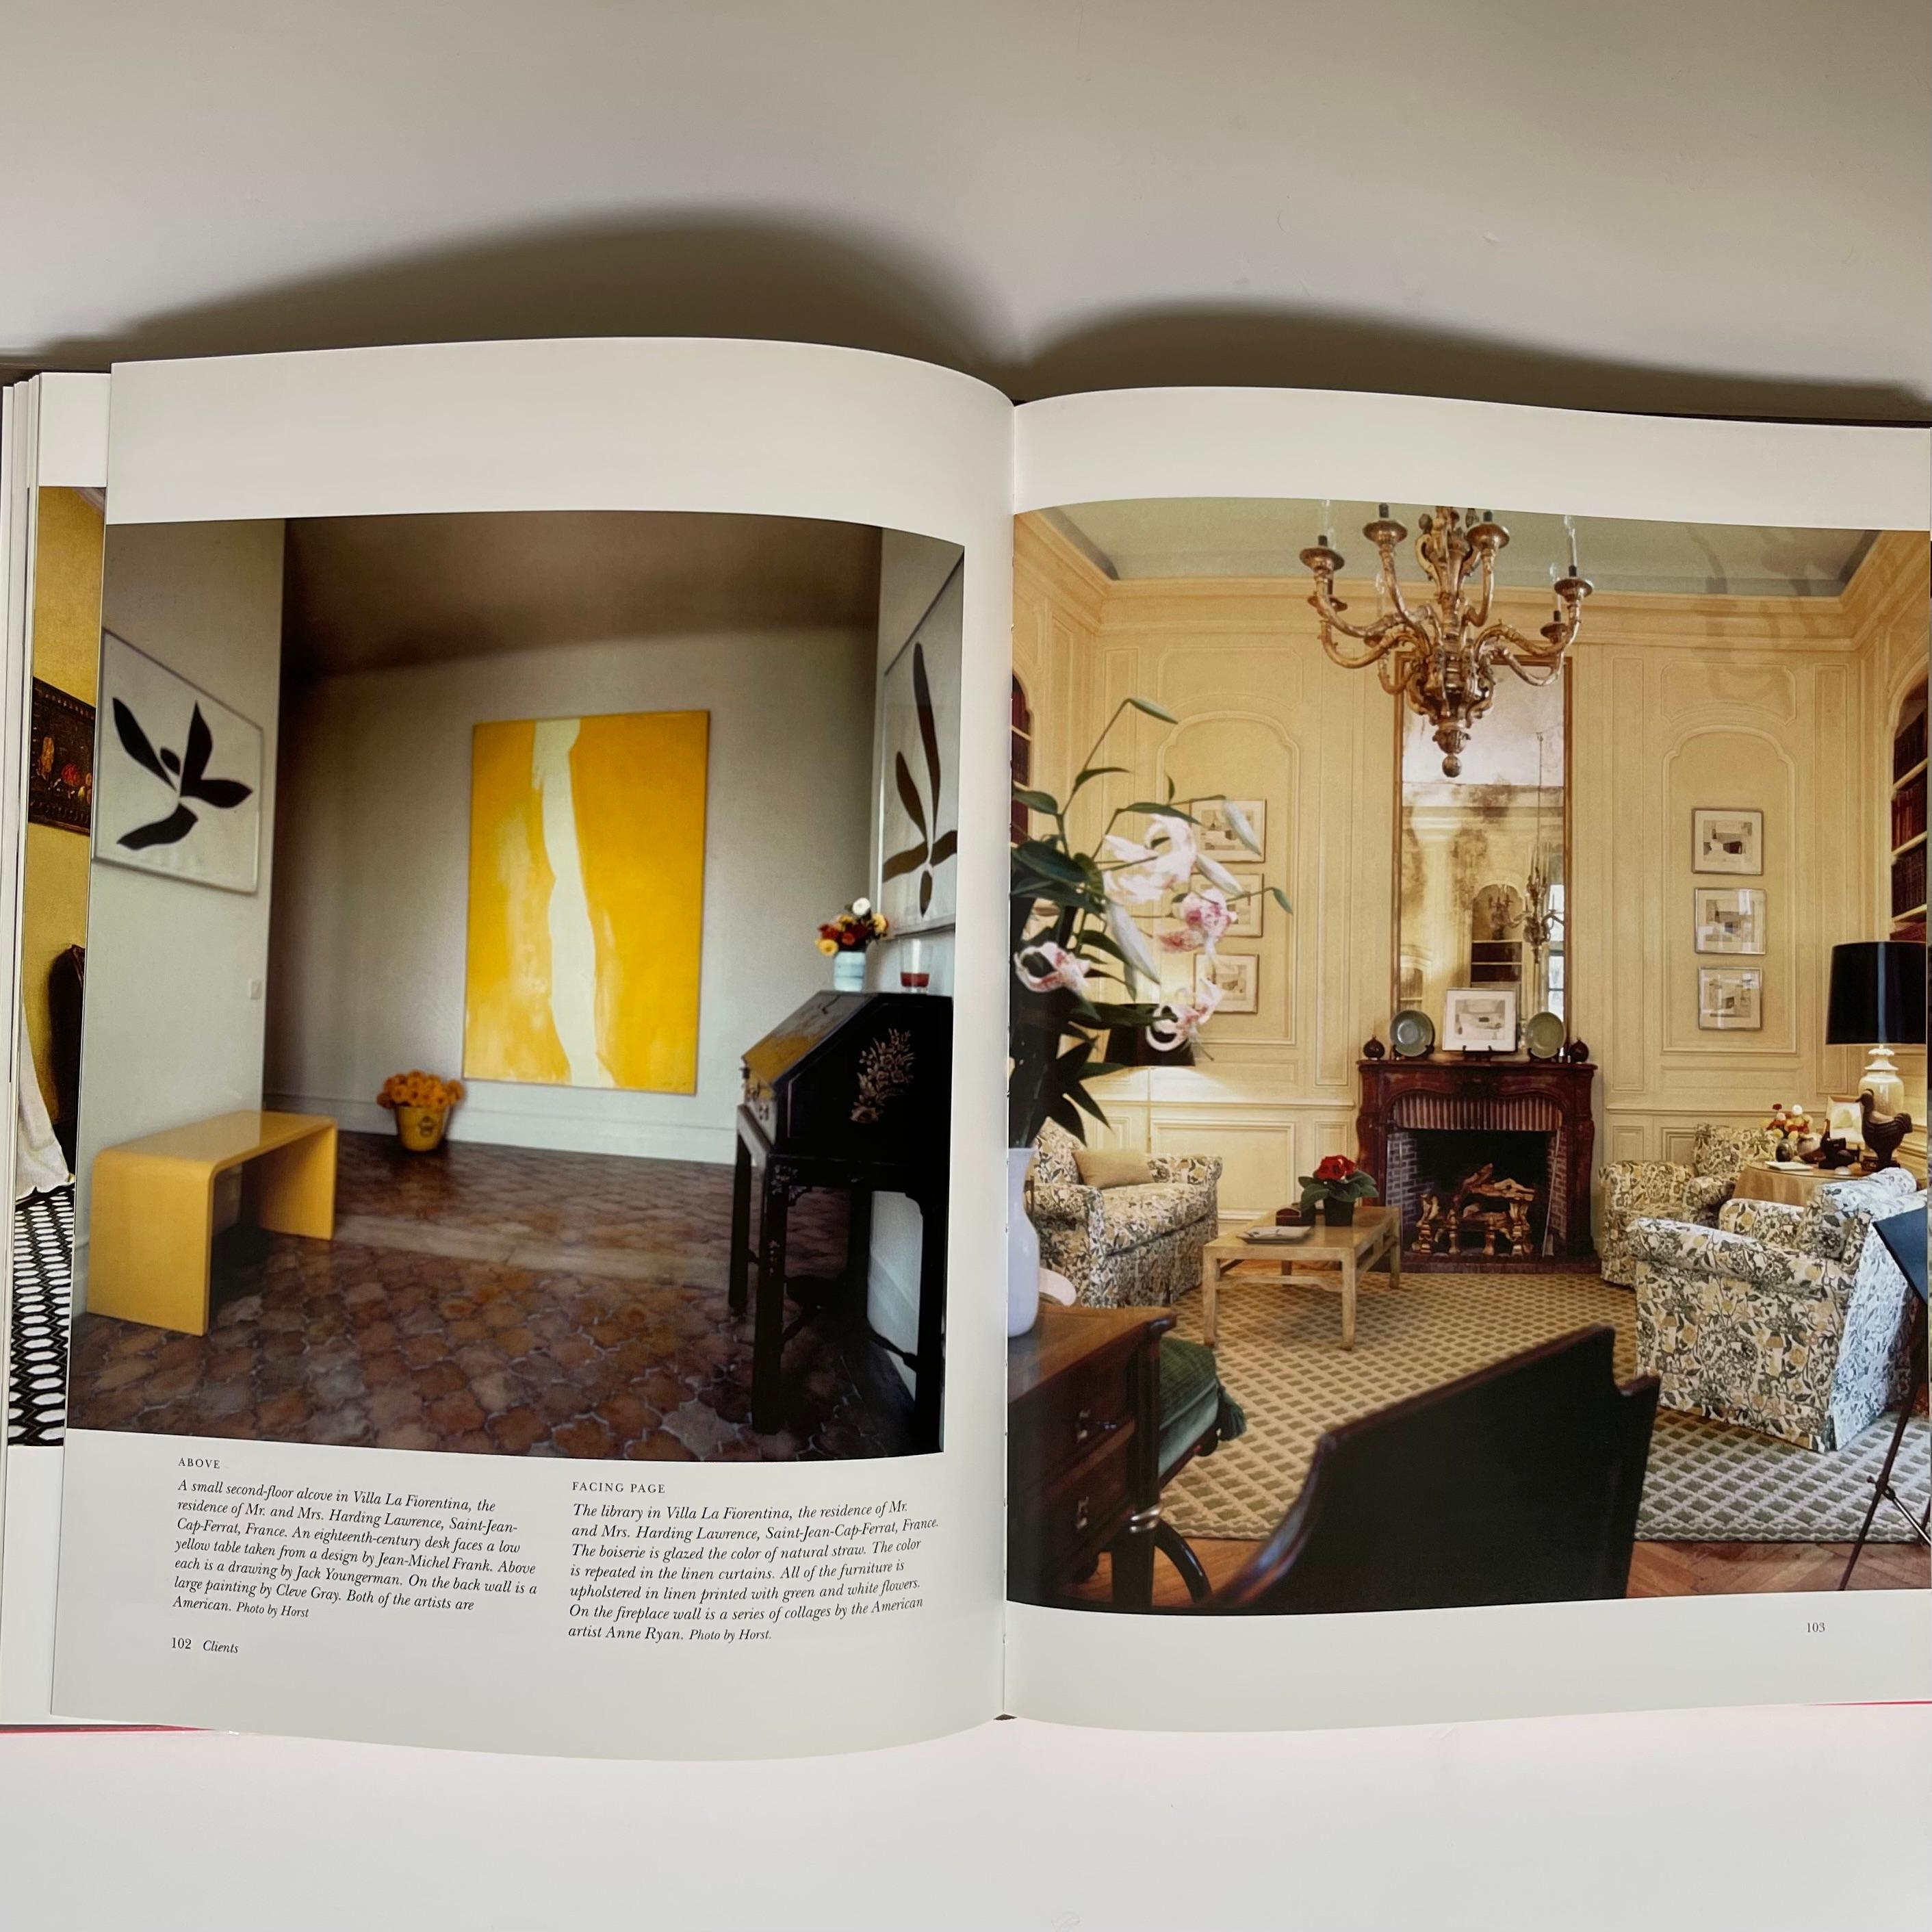 published by Rizzoli 2009

The definitive book on the legendary decorator Billy Baldwin, known as the 